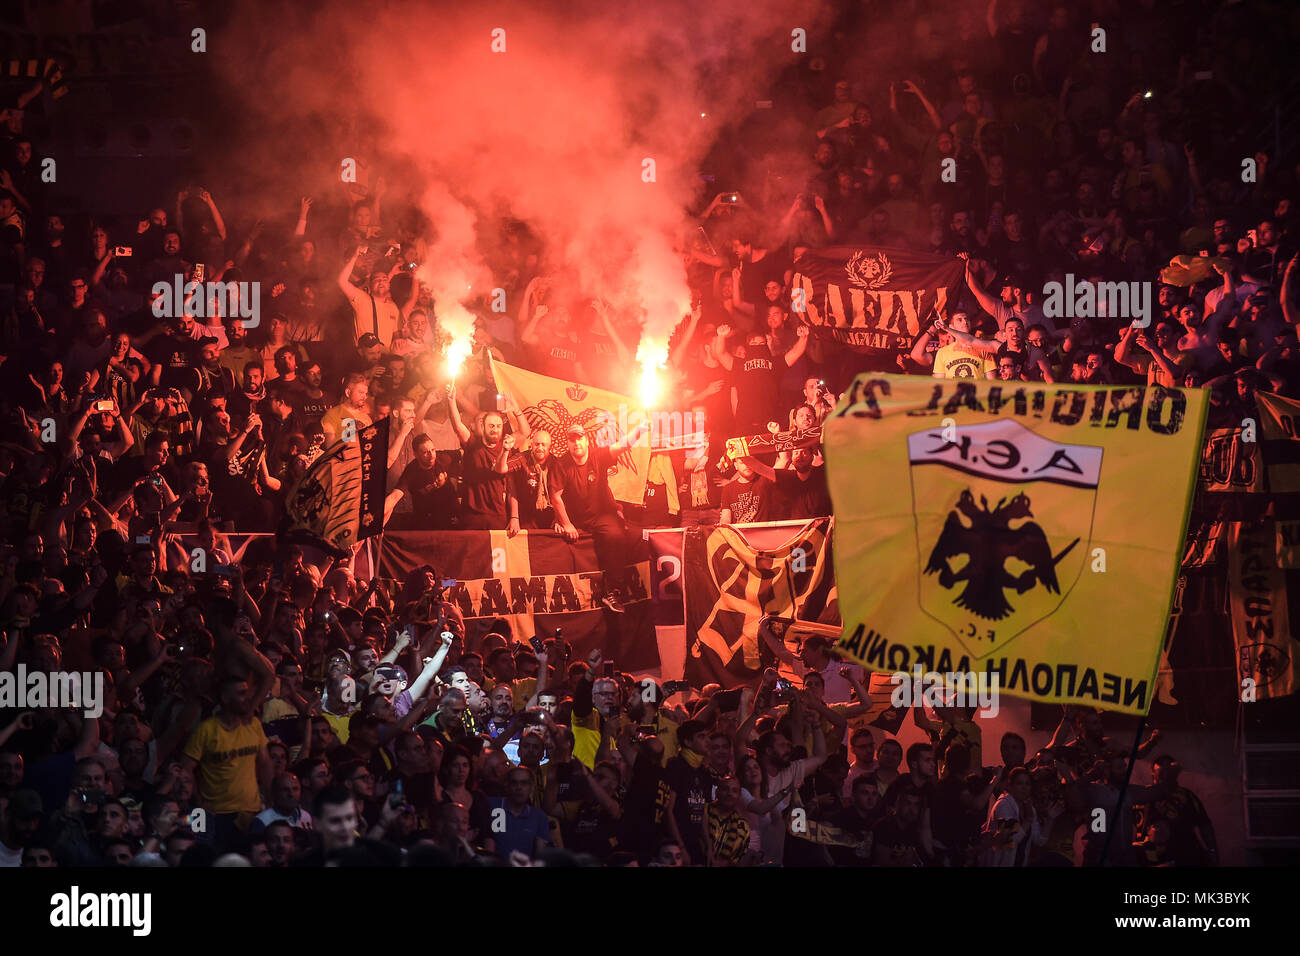 Aek Athens Fans High Resolution Stock Photography and Images - Alamy